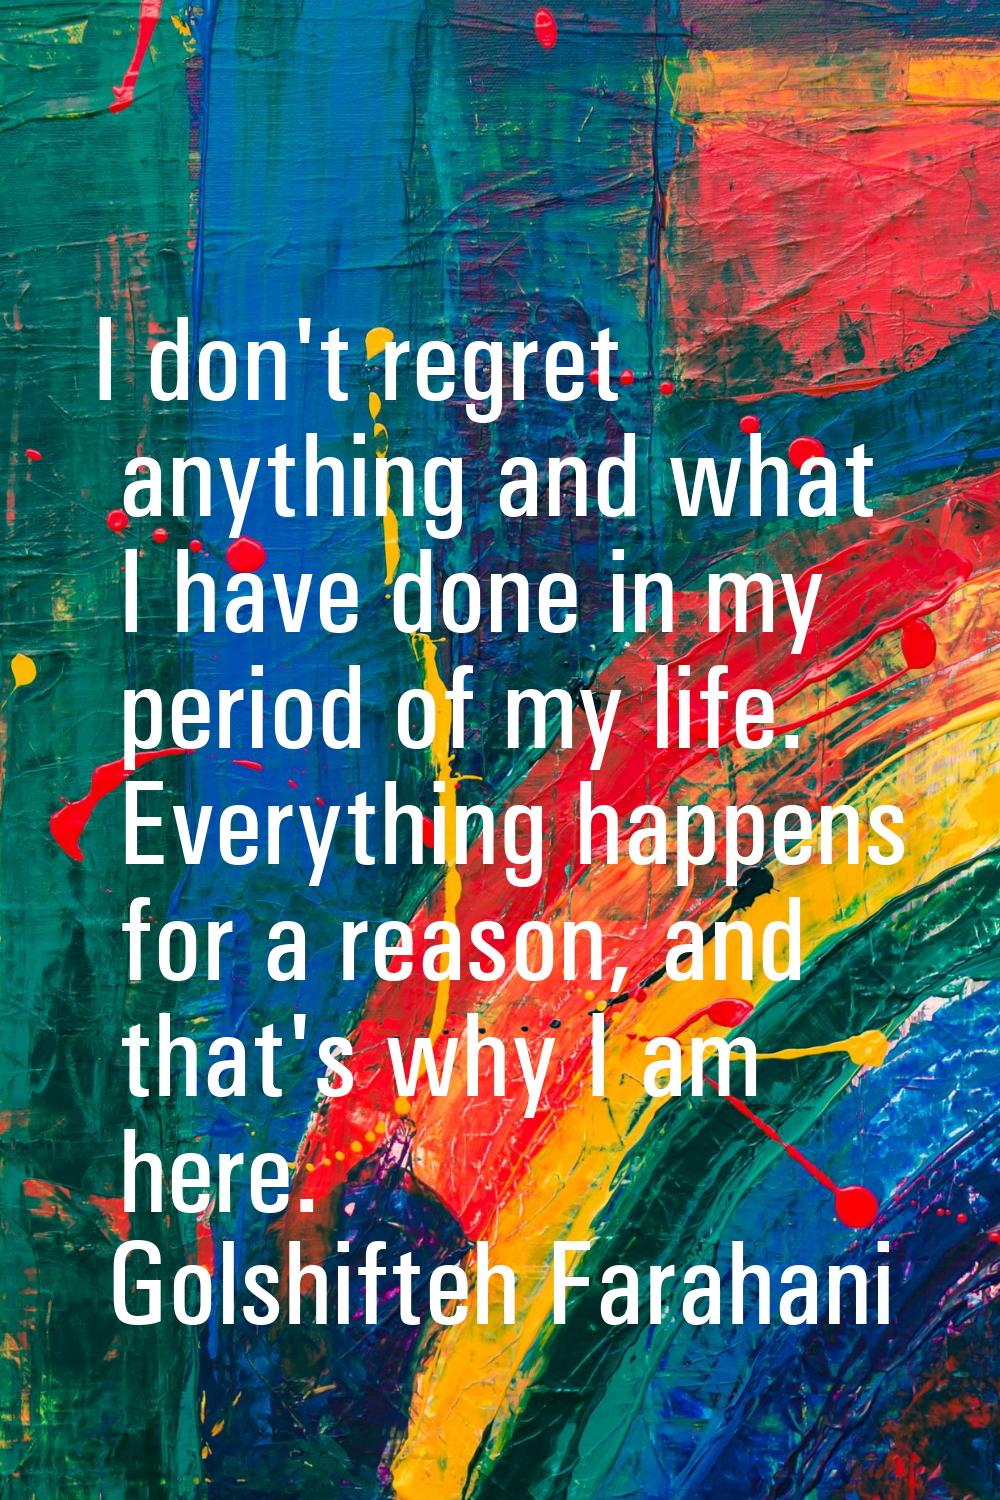 I don't regret anything and what I have done in my period of my life. Everything happens for a reas